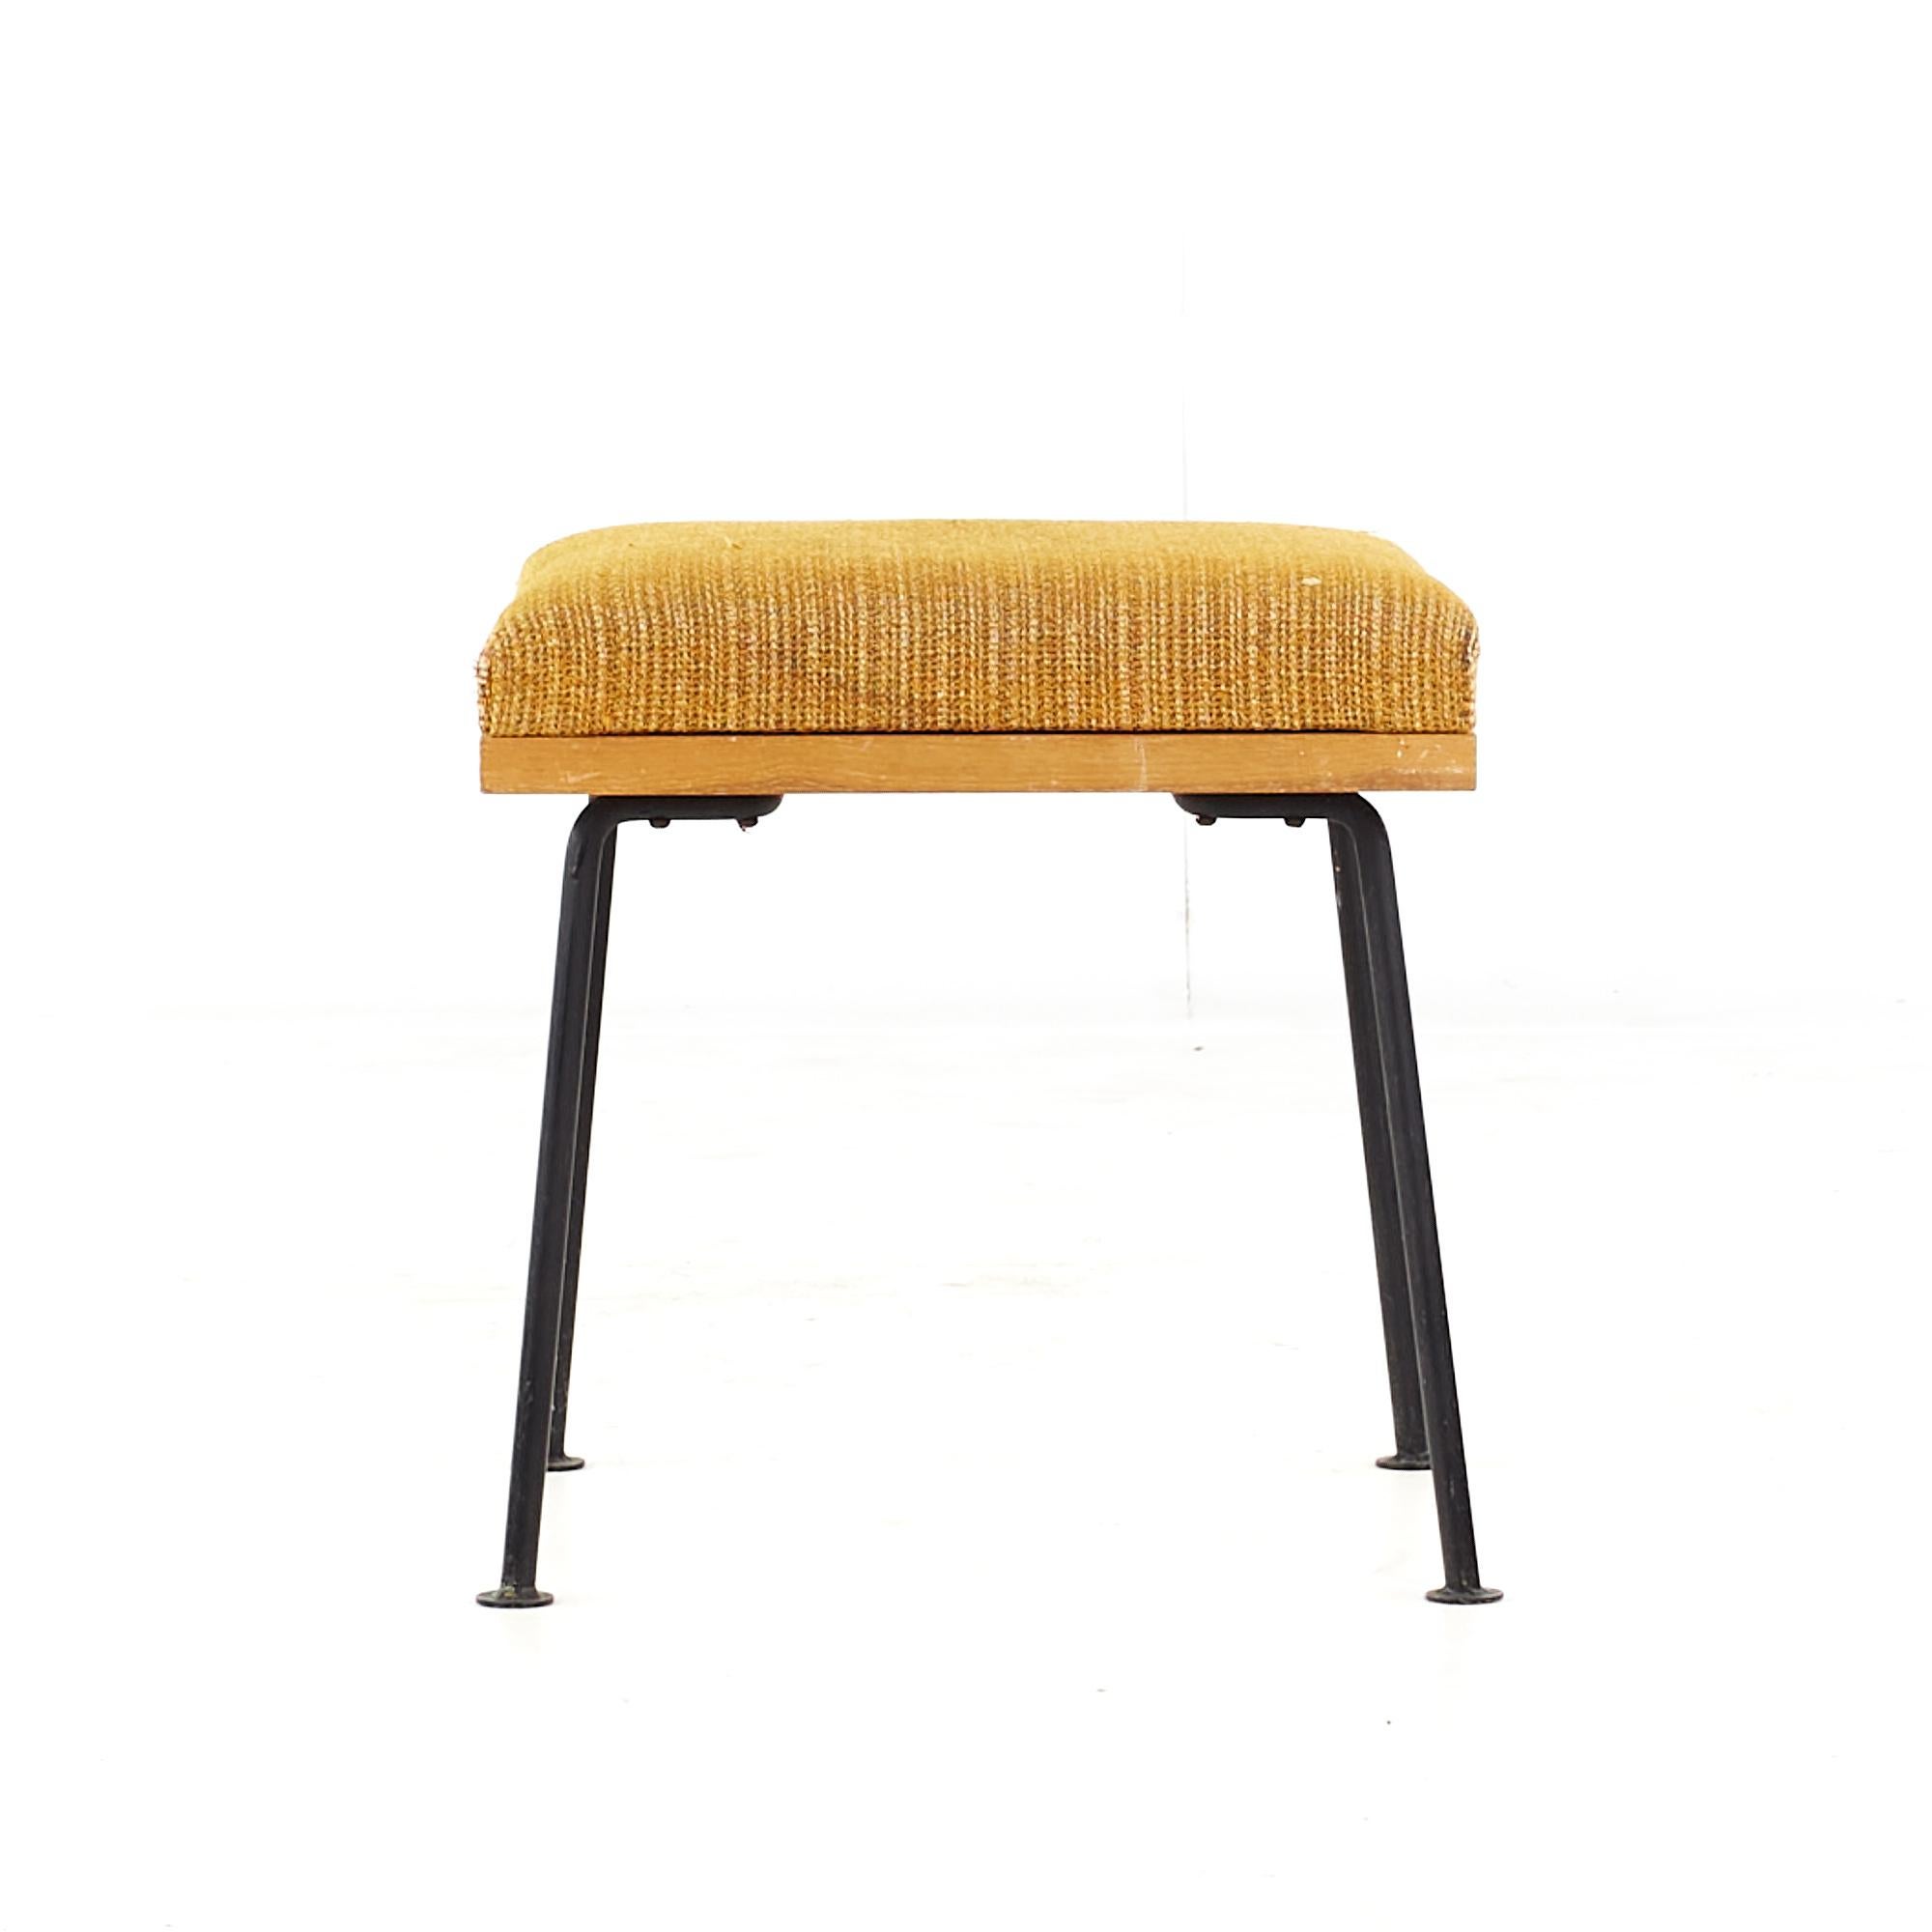 Raymond Loewy for Mengel Mid Century iron stool

This stool measures: 17.25 wide x 17.25 deep x 18 inches high

All pieces of furniture can be had in what we call restored vintage condition. That means the piece is restored upon purchase so it’s